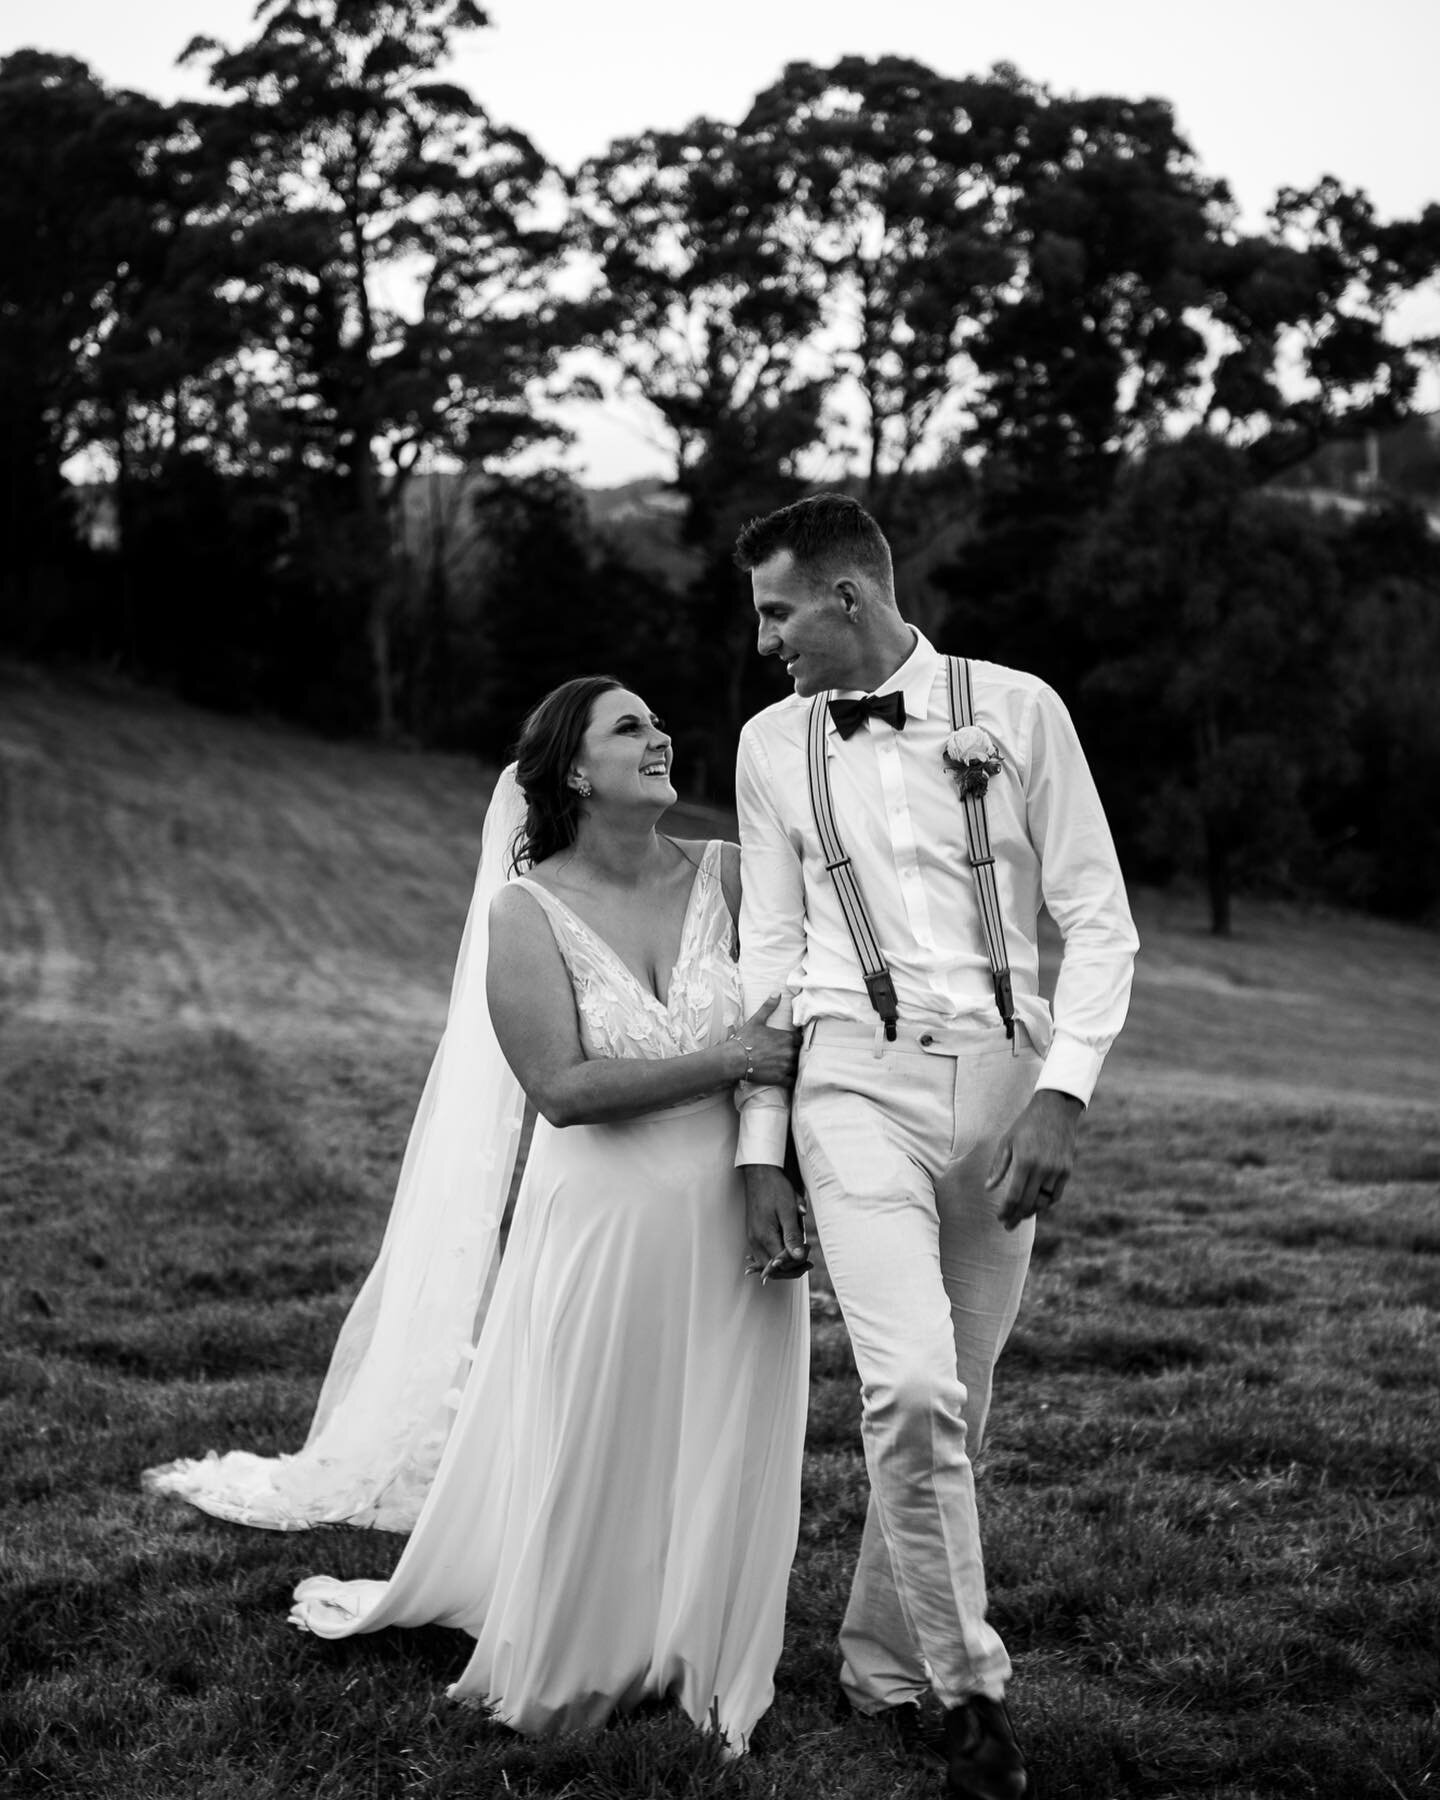 Mr and Mrs Kinnear 🥰

These two lovebirds wed a short time ago down in Macedon and all I have to say about their wedding and the beautiful couple is wow! 

I also just want to say I have the best job in the world being able to photograph special mom